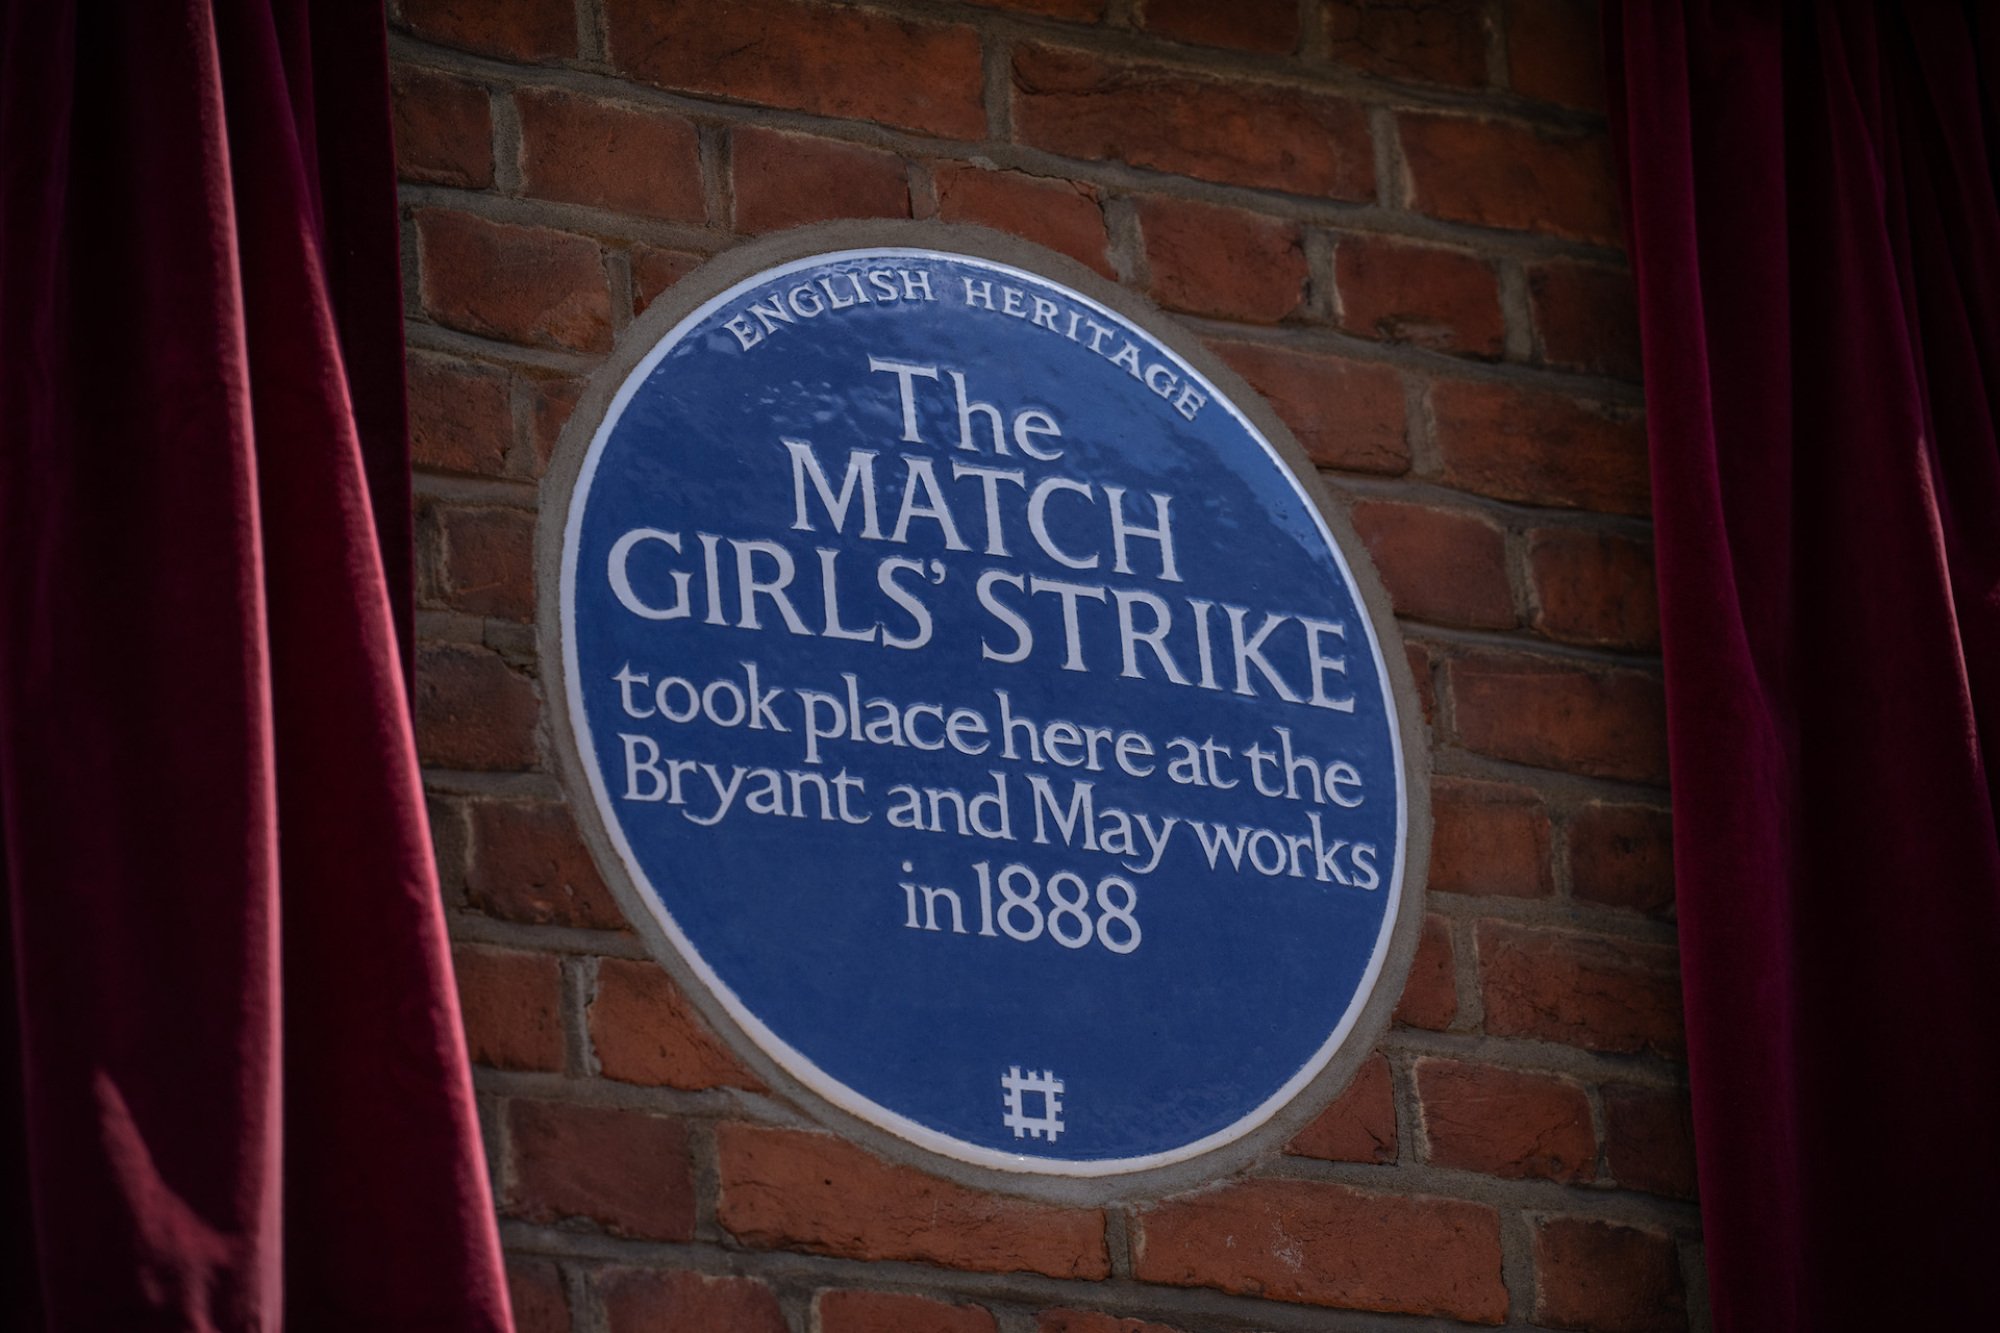 A newly-unveiled blue plaque dedicated to the matchgirls strike is pictured at the former Bryant and May match factory on July 5, 2022 in London, England.